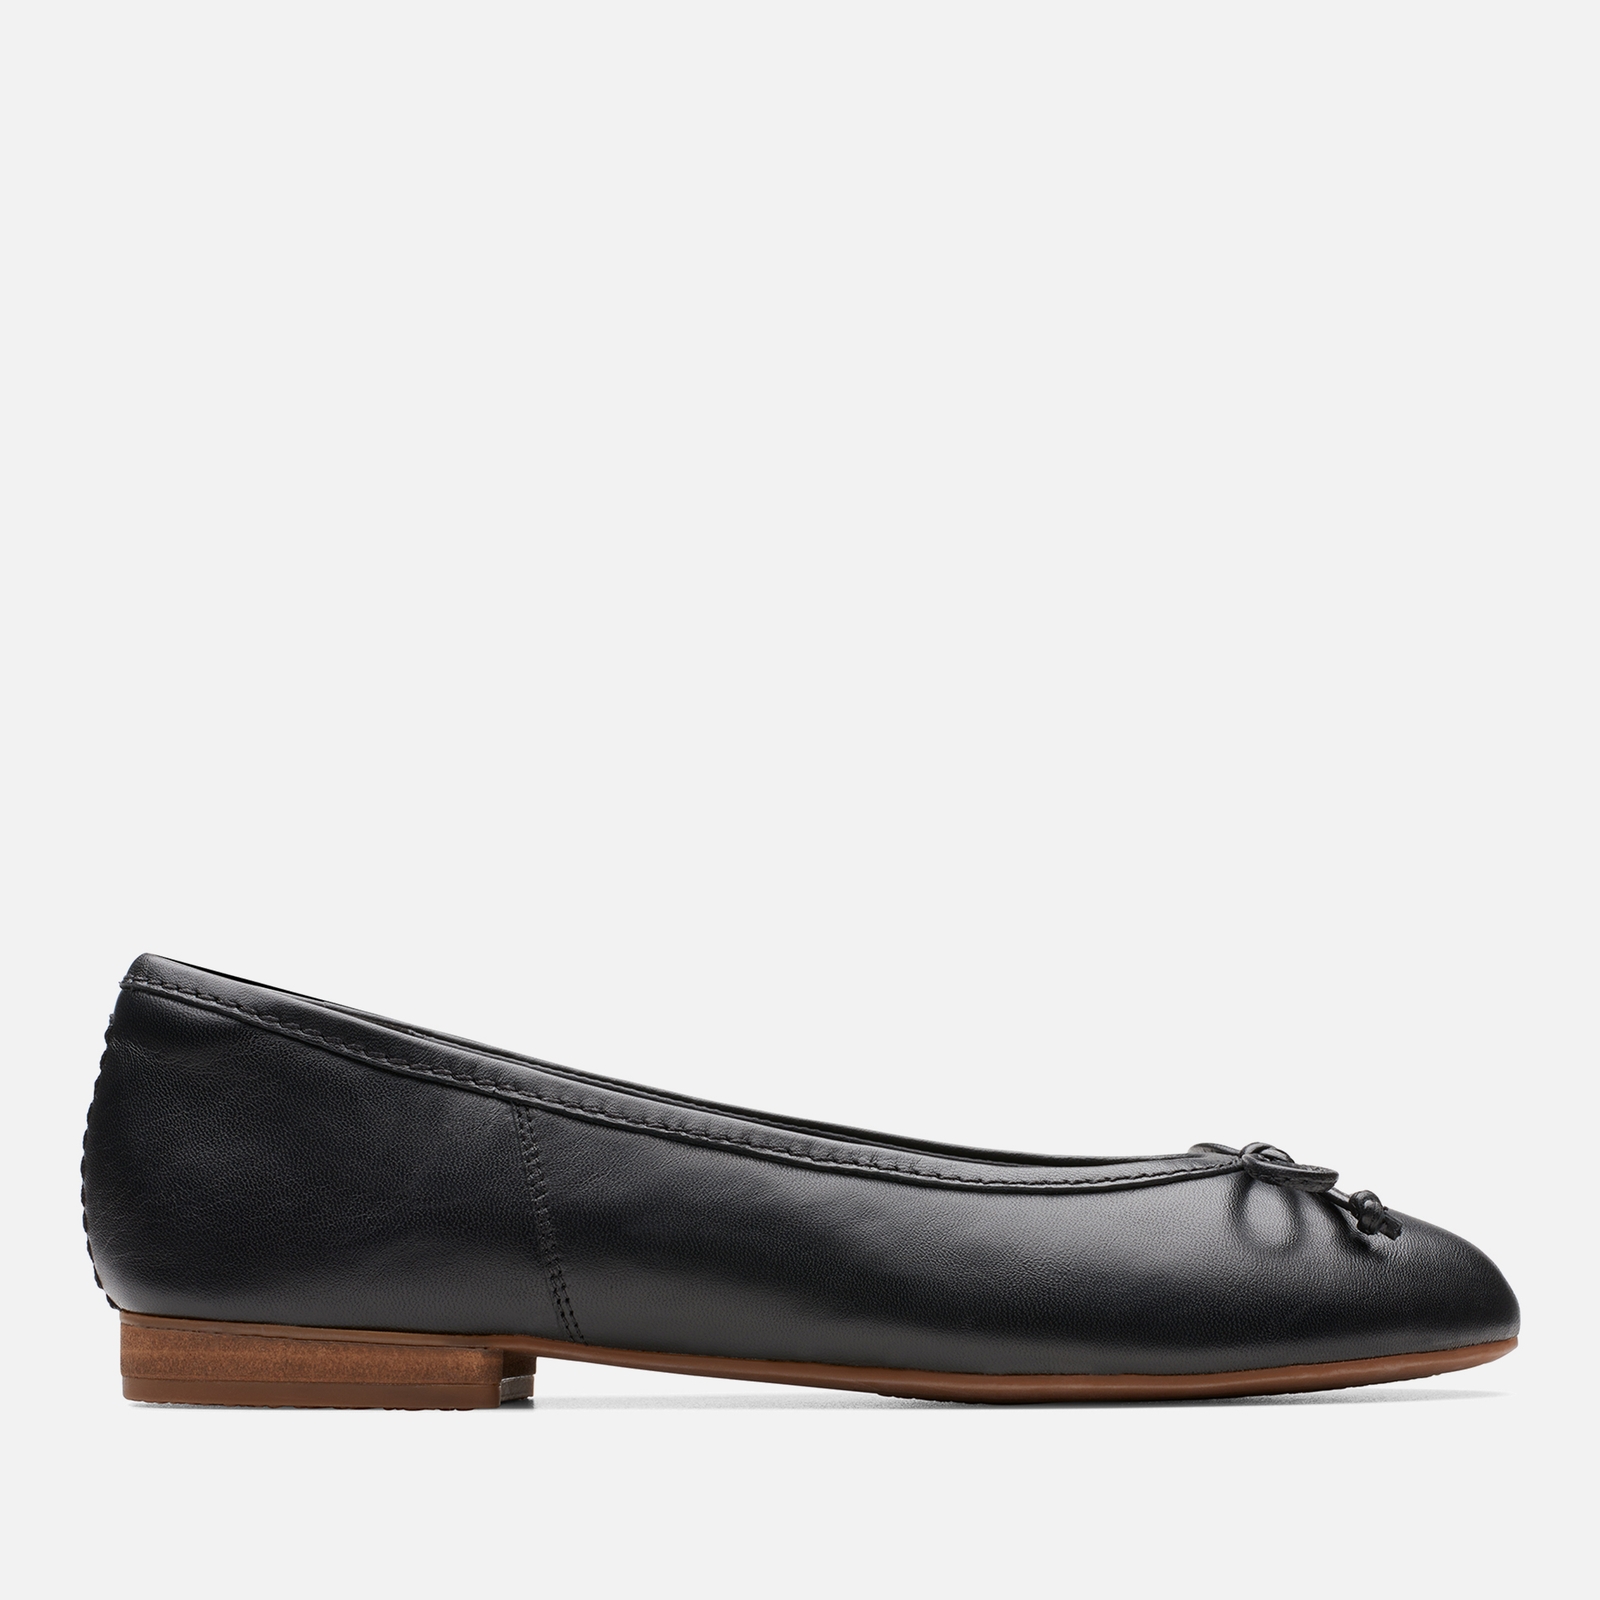 Clarks Women’s Fawna Lily Leather Ballet Flats